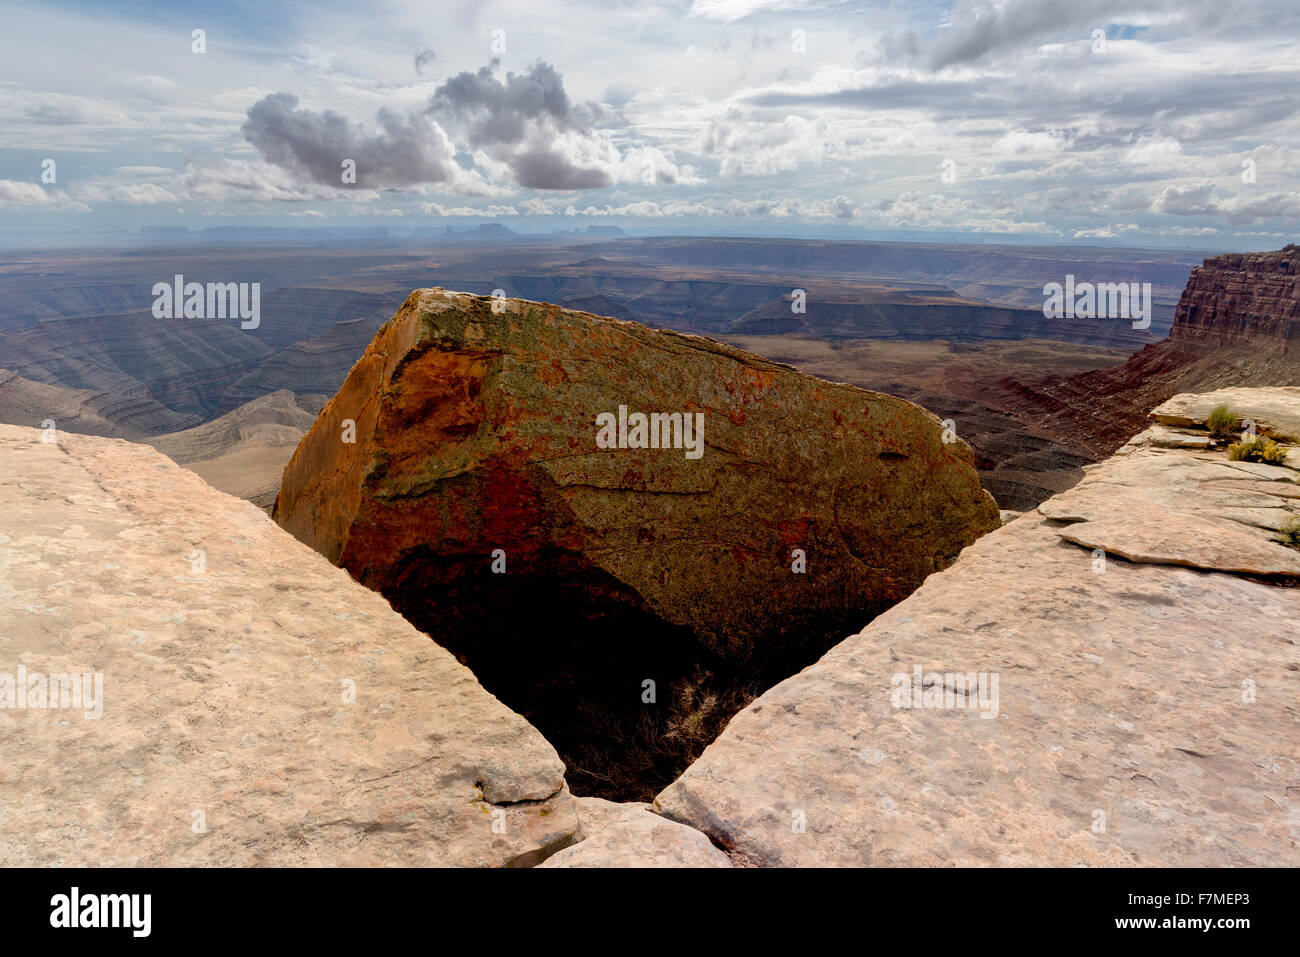 The rim of Cedar Mesa, Utah, with the San Juan River Canyon and Monument Valley Arizona in the background. Stock Photo